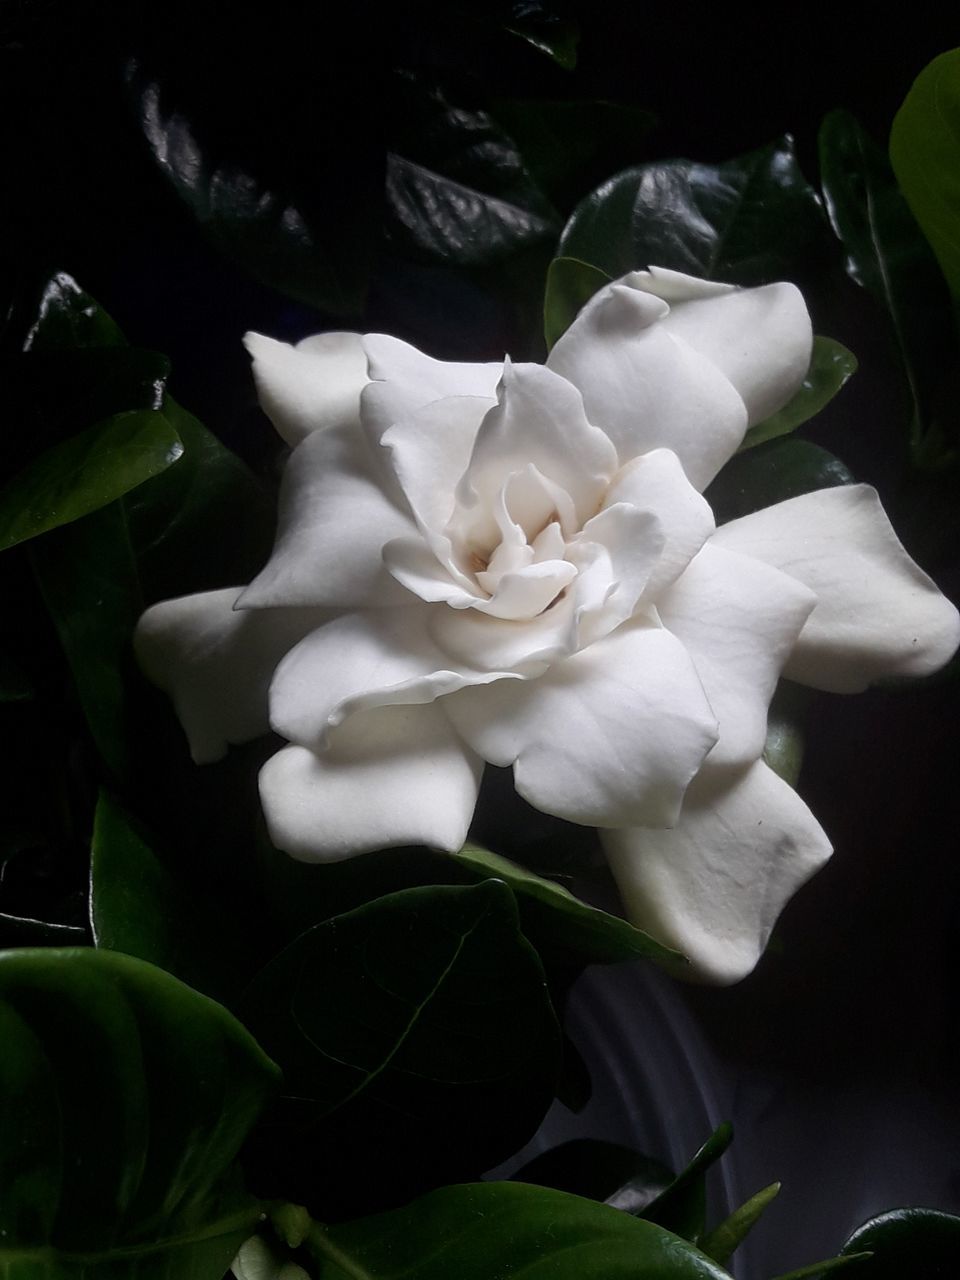 CLOSE-UP OF WHITE ROSE ON PLANT